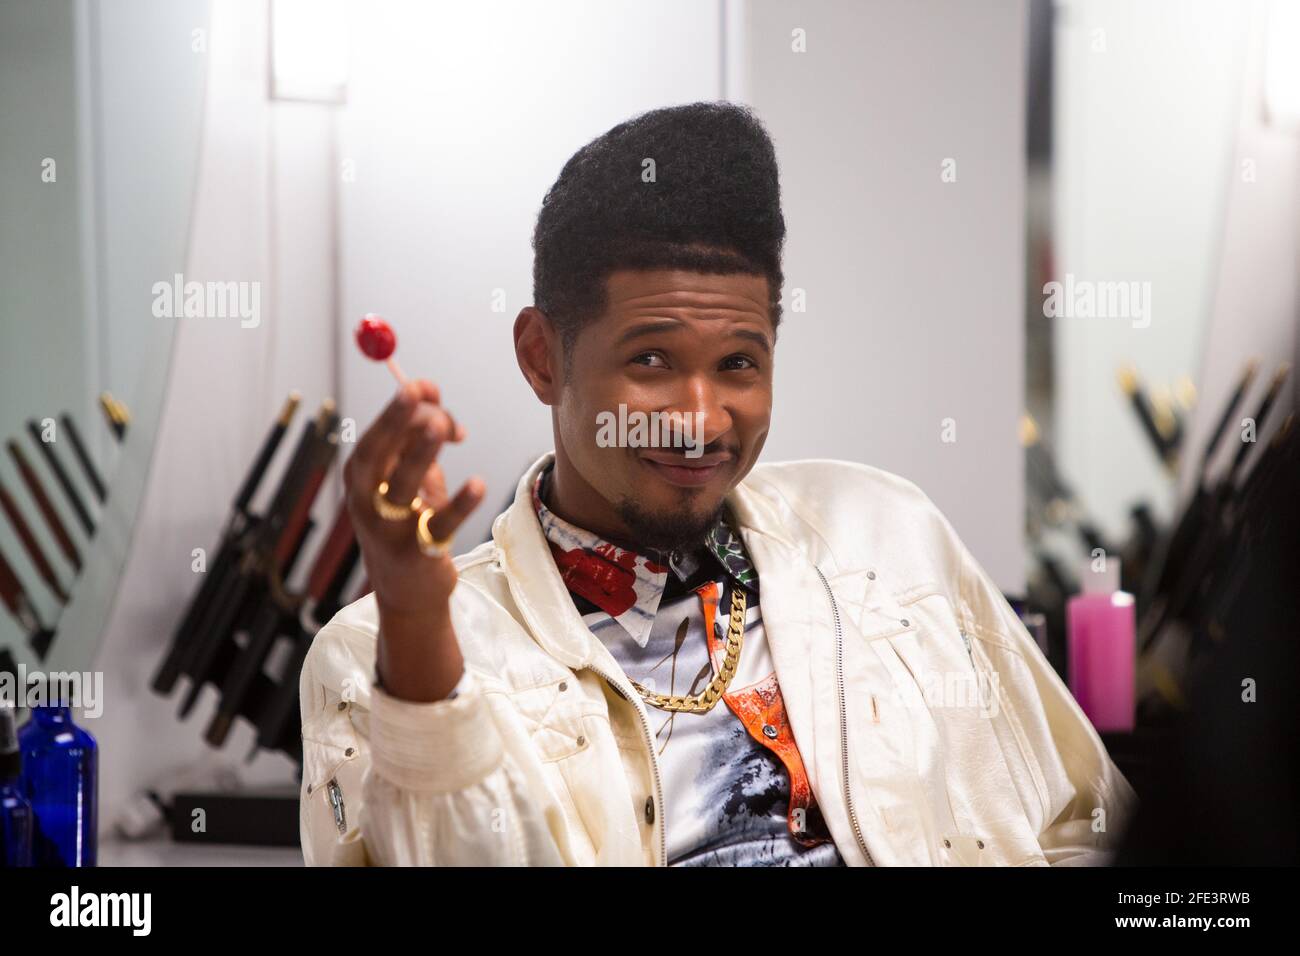 USHER in BAD HAIR (2020), directed by JUSTIN SIMIEN. Credit: Culture Machine / Sight Unseen Pictures / Album Stock Photo